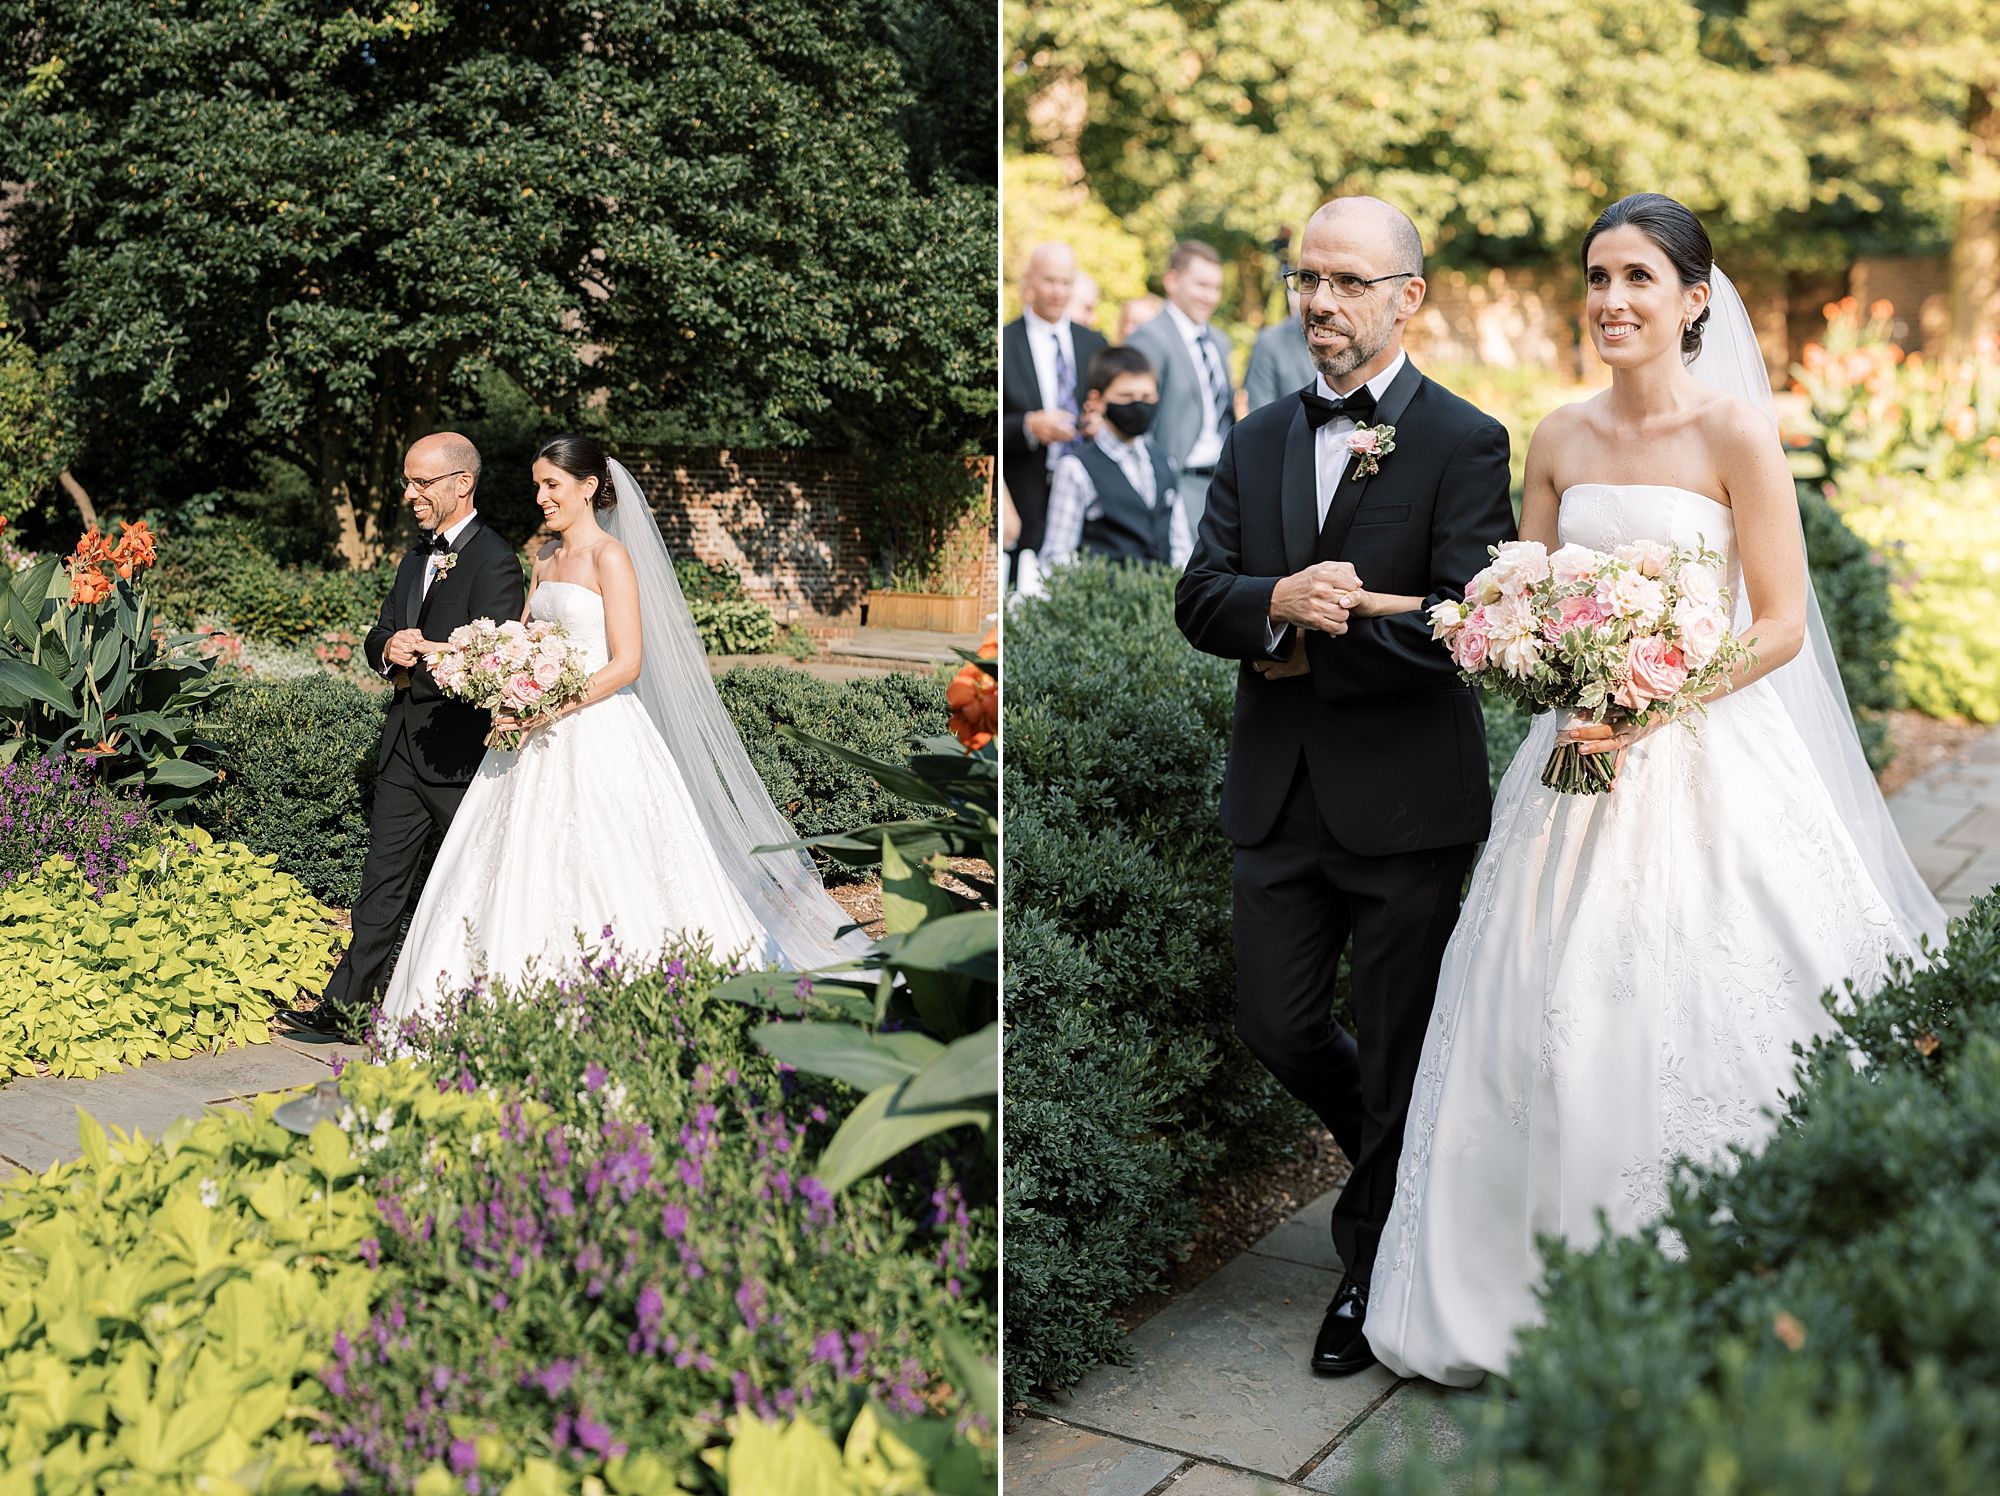 brother walks bride down aisle for ceremony in gardens at Greenville Country Club